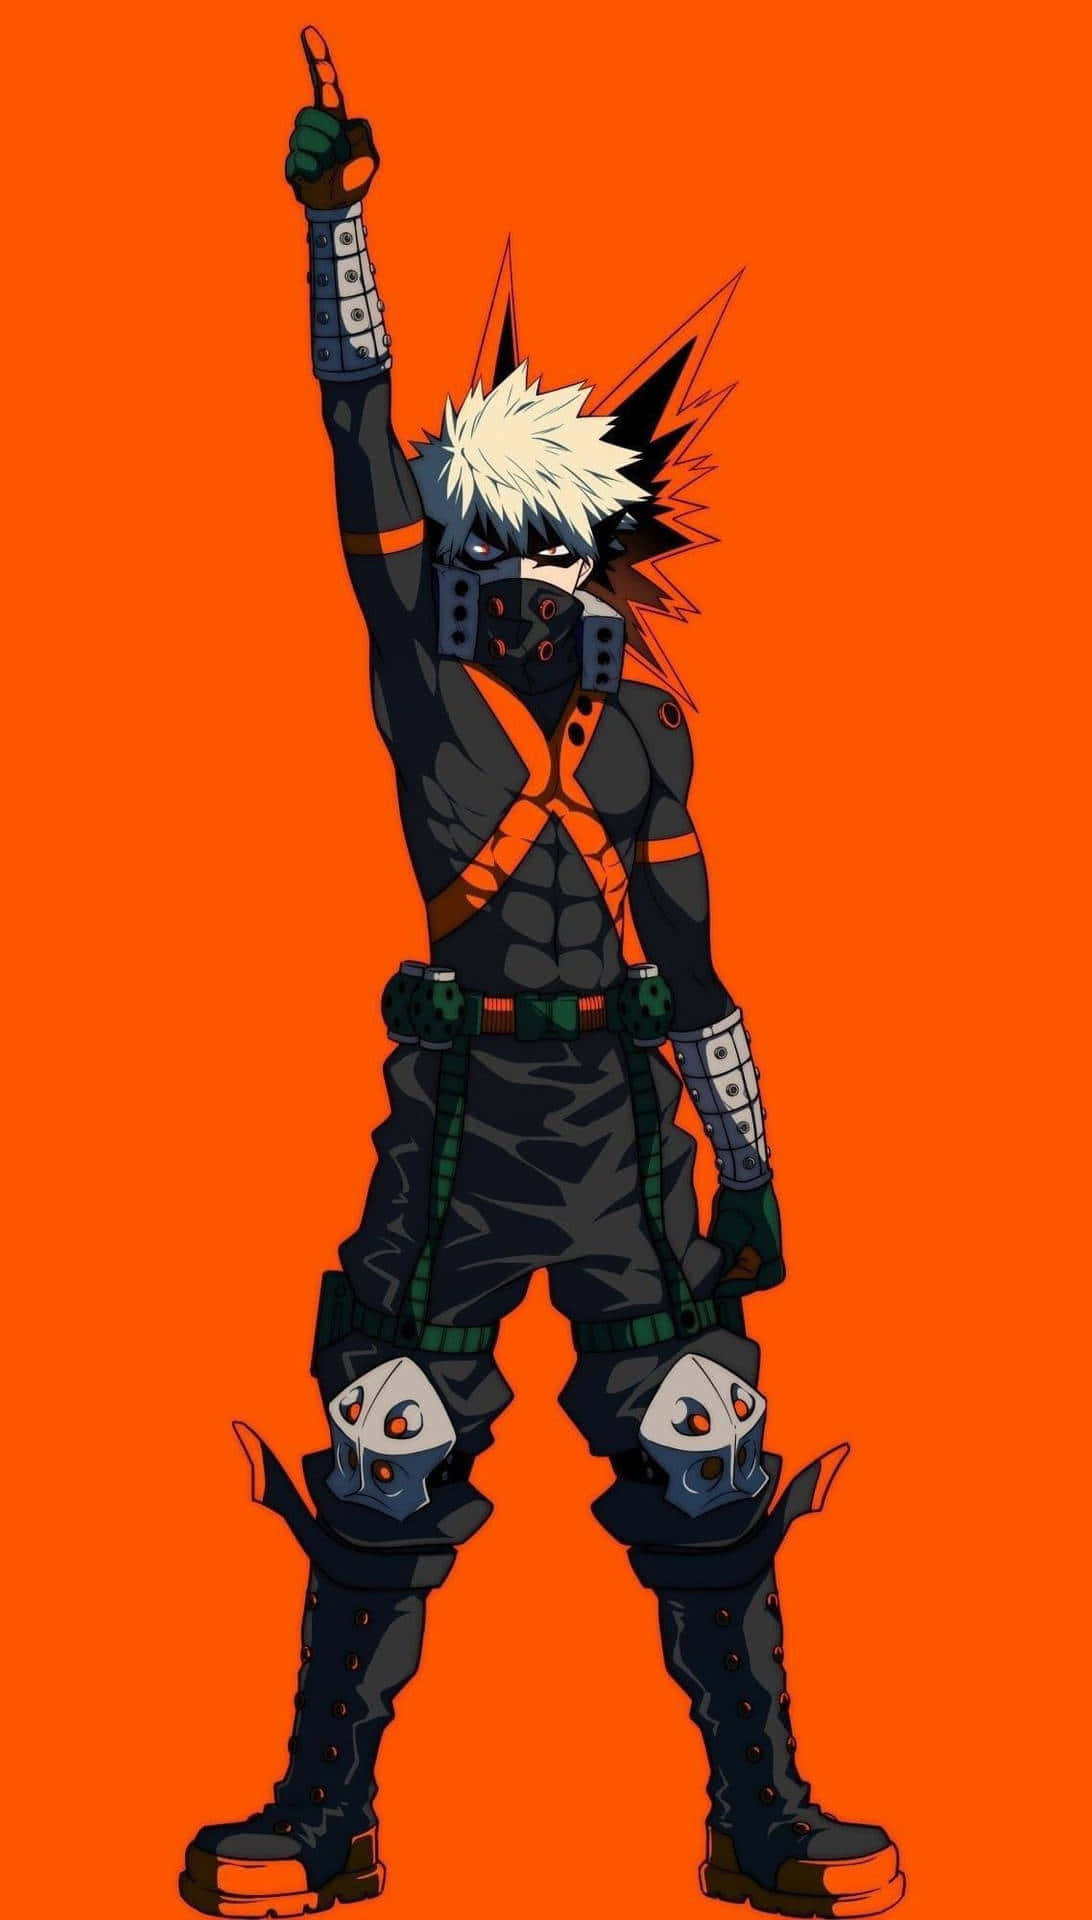 Get Ready for Amazing Technology with the New Bakugo Phone Wallpaper